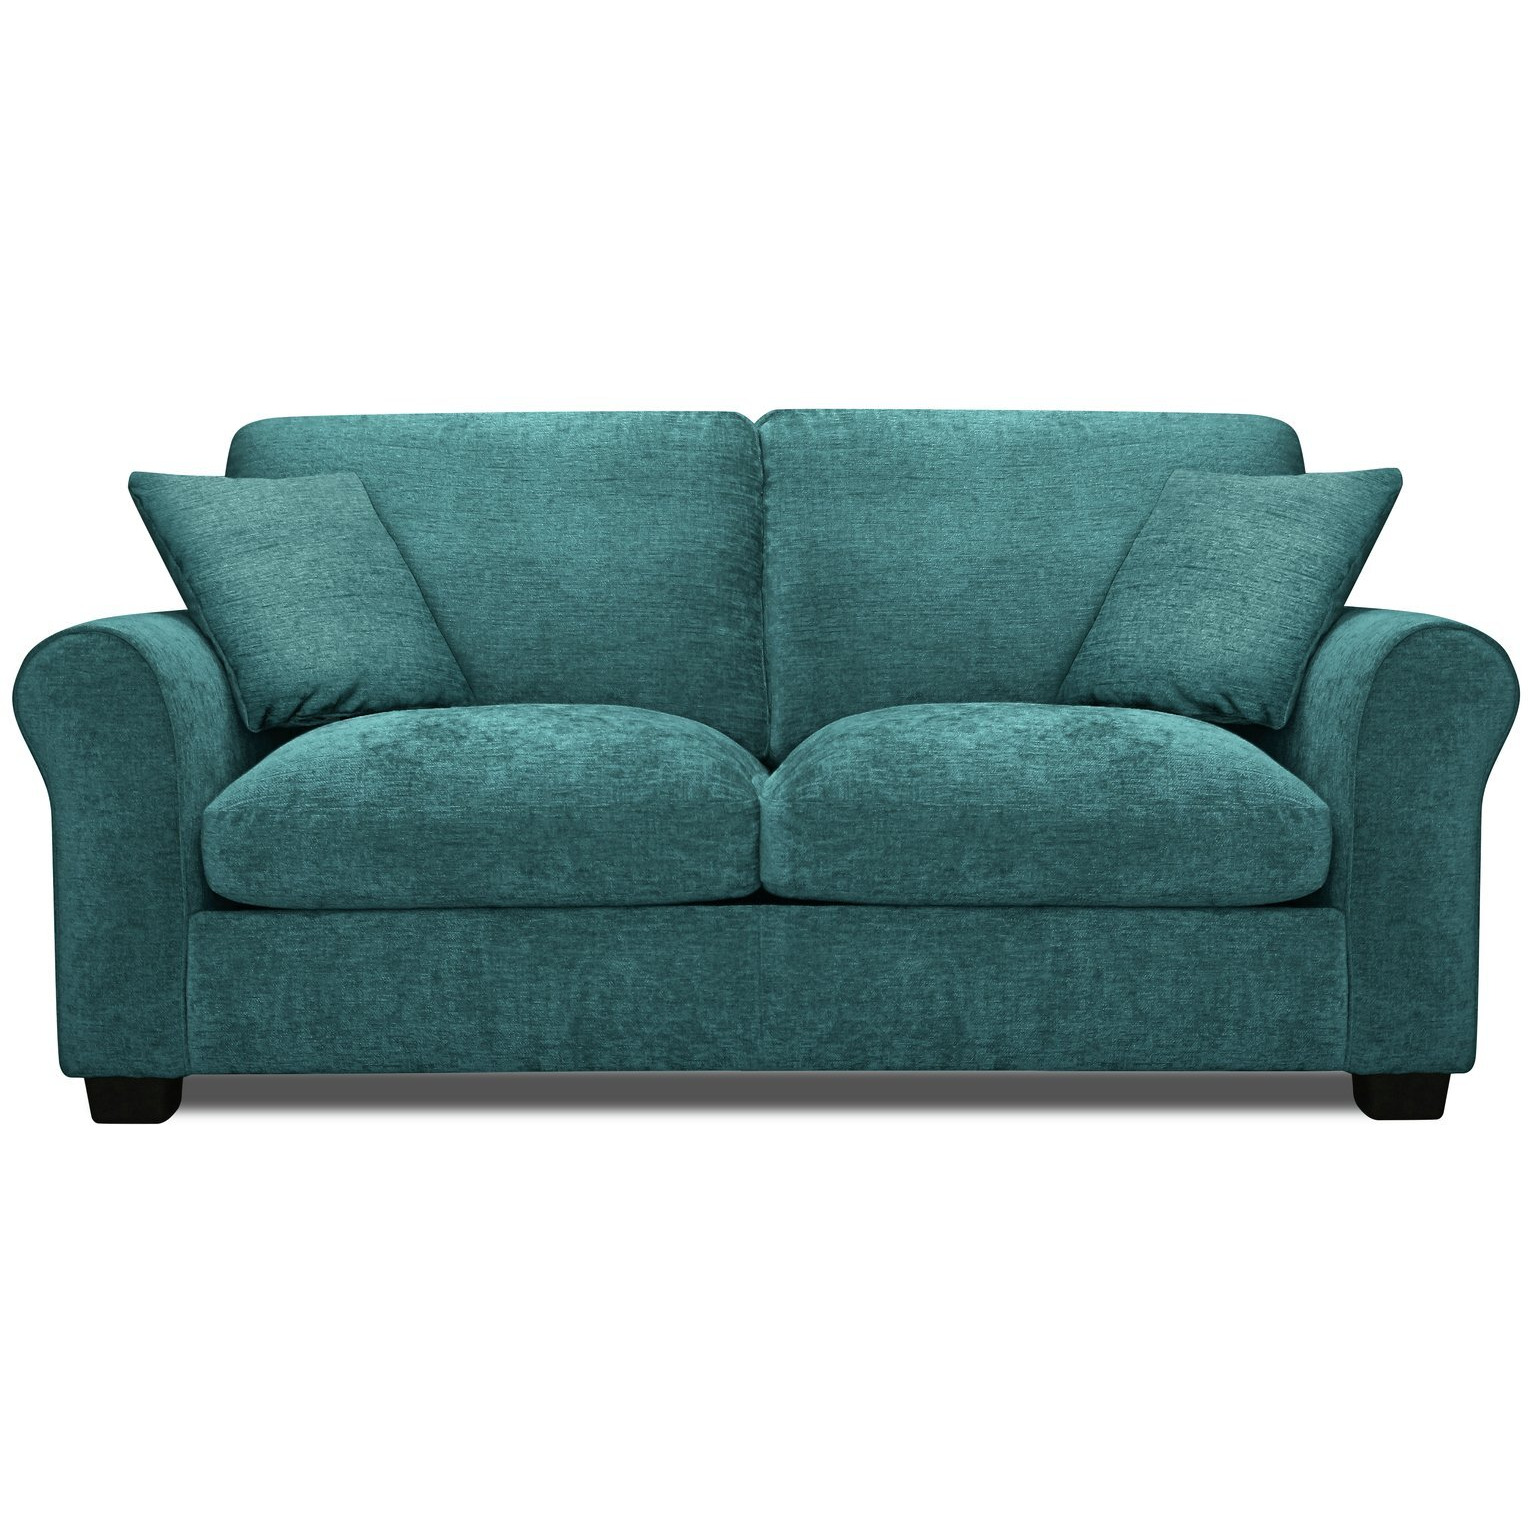 Argos Home Tammy 2 Seater Fabric Sofa bed - Teal - image 1